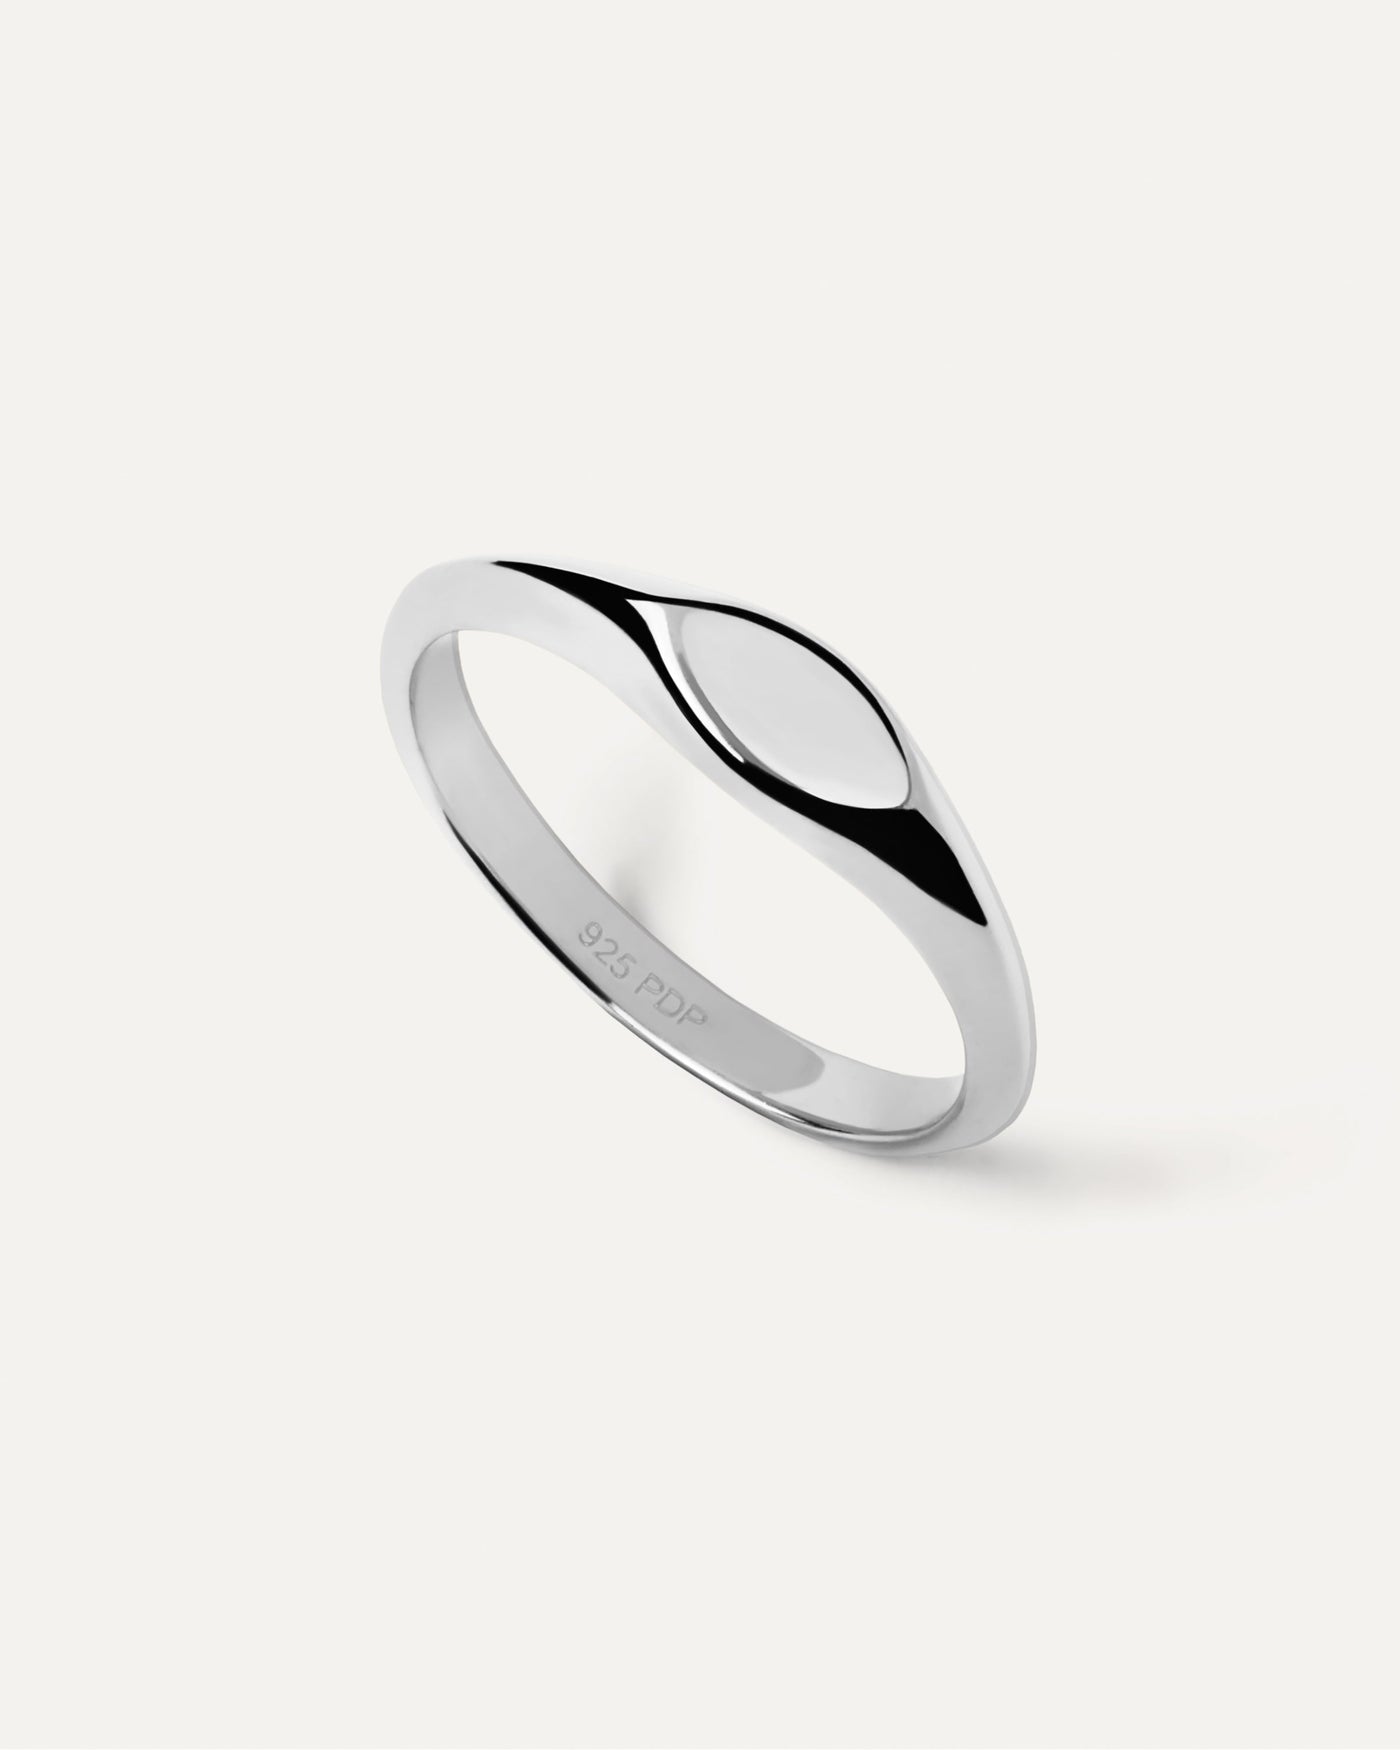 2023 Selection | Duke Stamp Silver Ring. Sterling silver slim signet ring with eye shape plain design. Get the latest arrival from PDPAOLA. Place your order safely and get this Best Seller. Free Shipping.